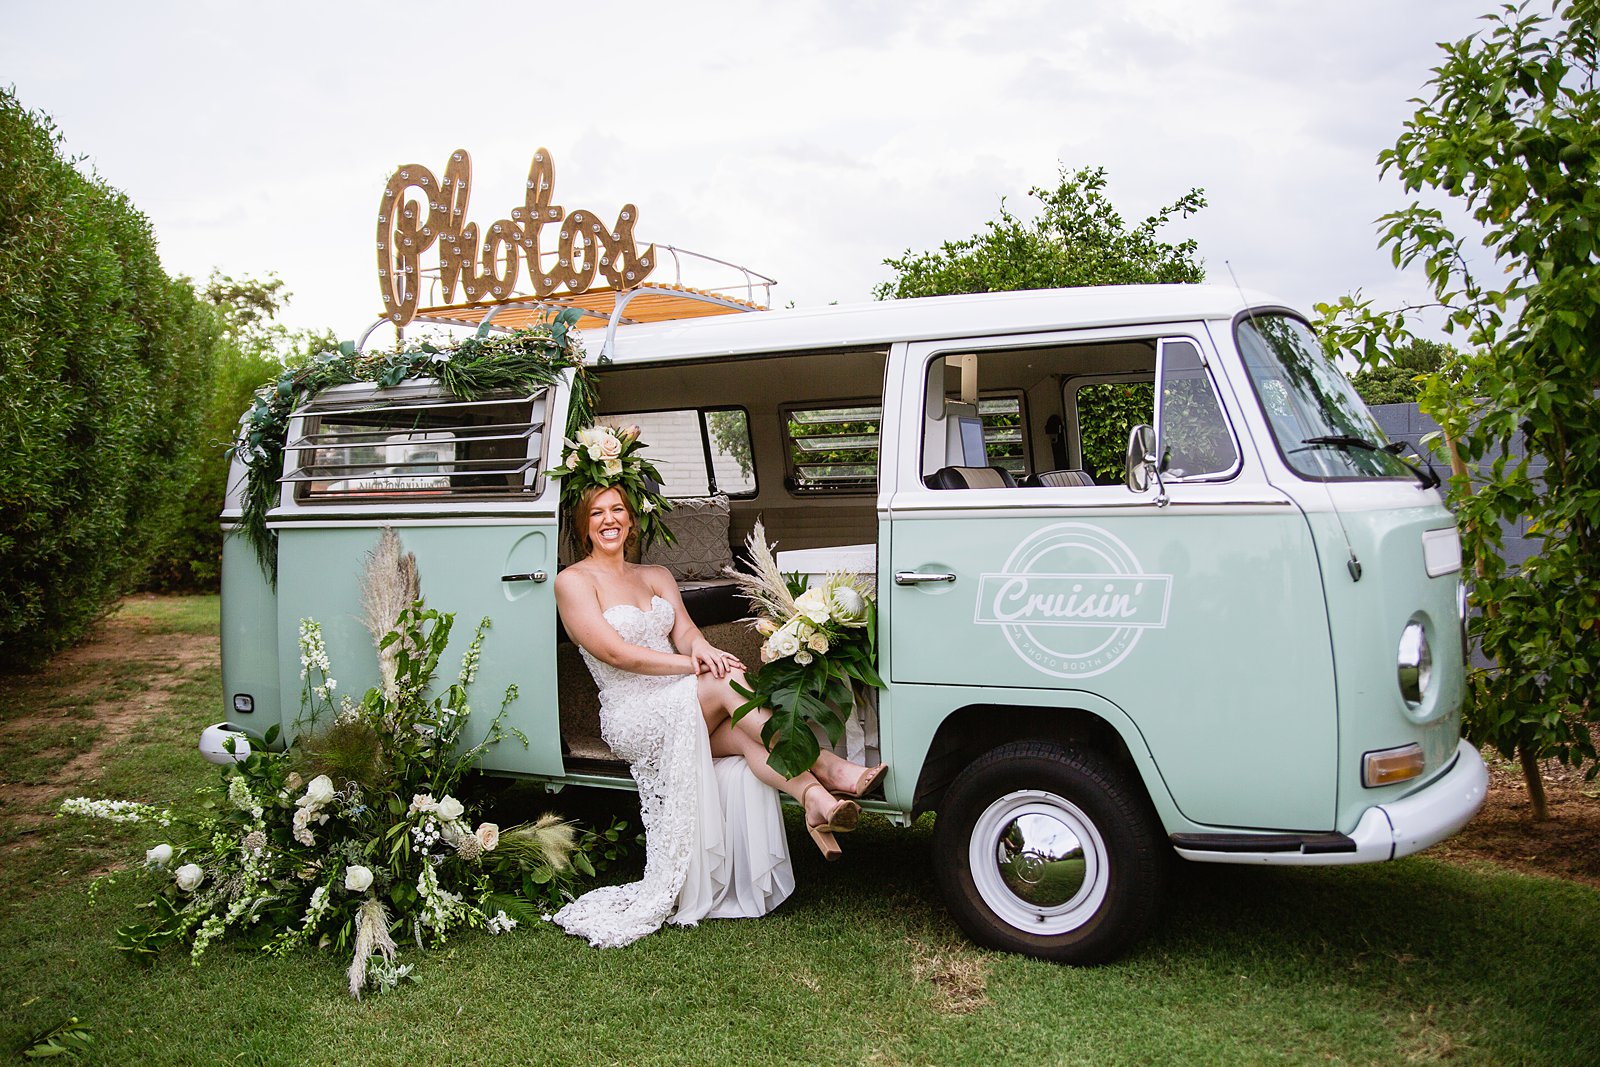 Bride laughing in the Cruisin' VW Photo Booth Bus at a Gather Estate wedding reception by Phoenix wedding photographer PMA Photography.